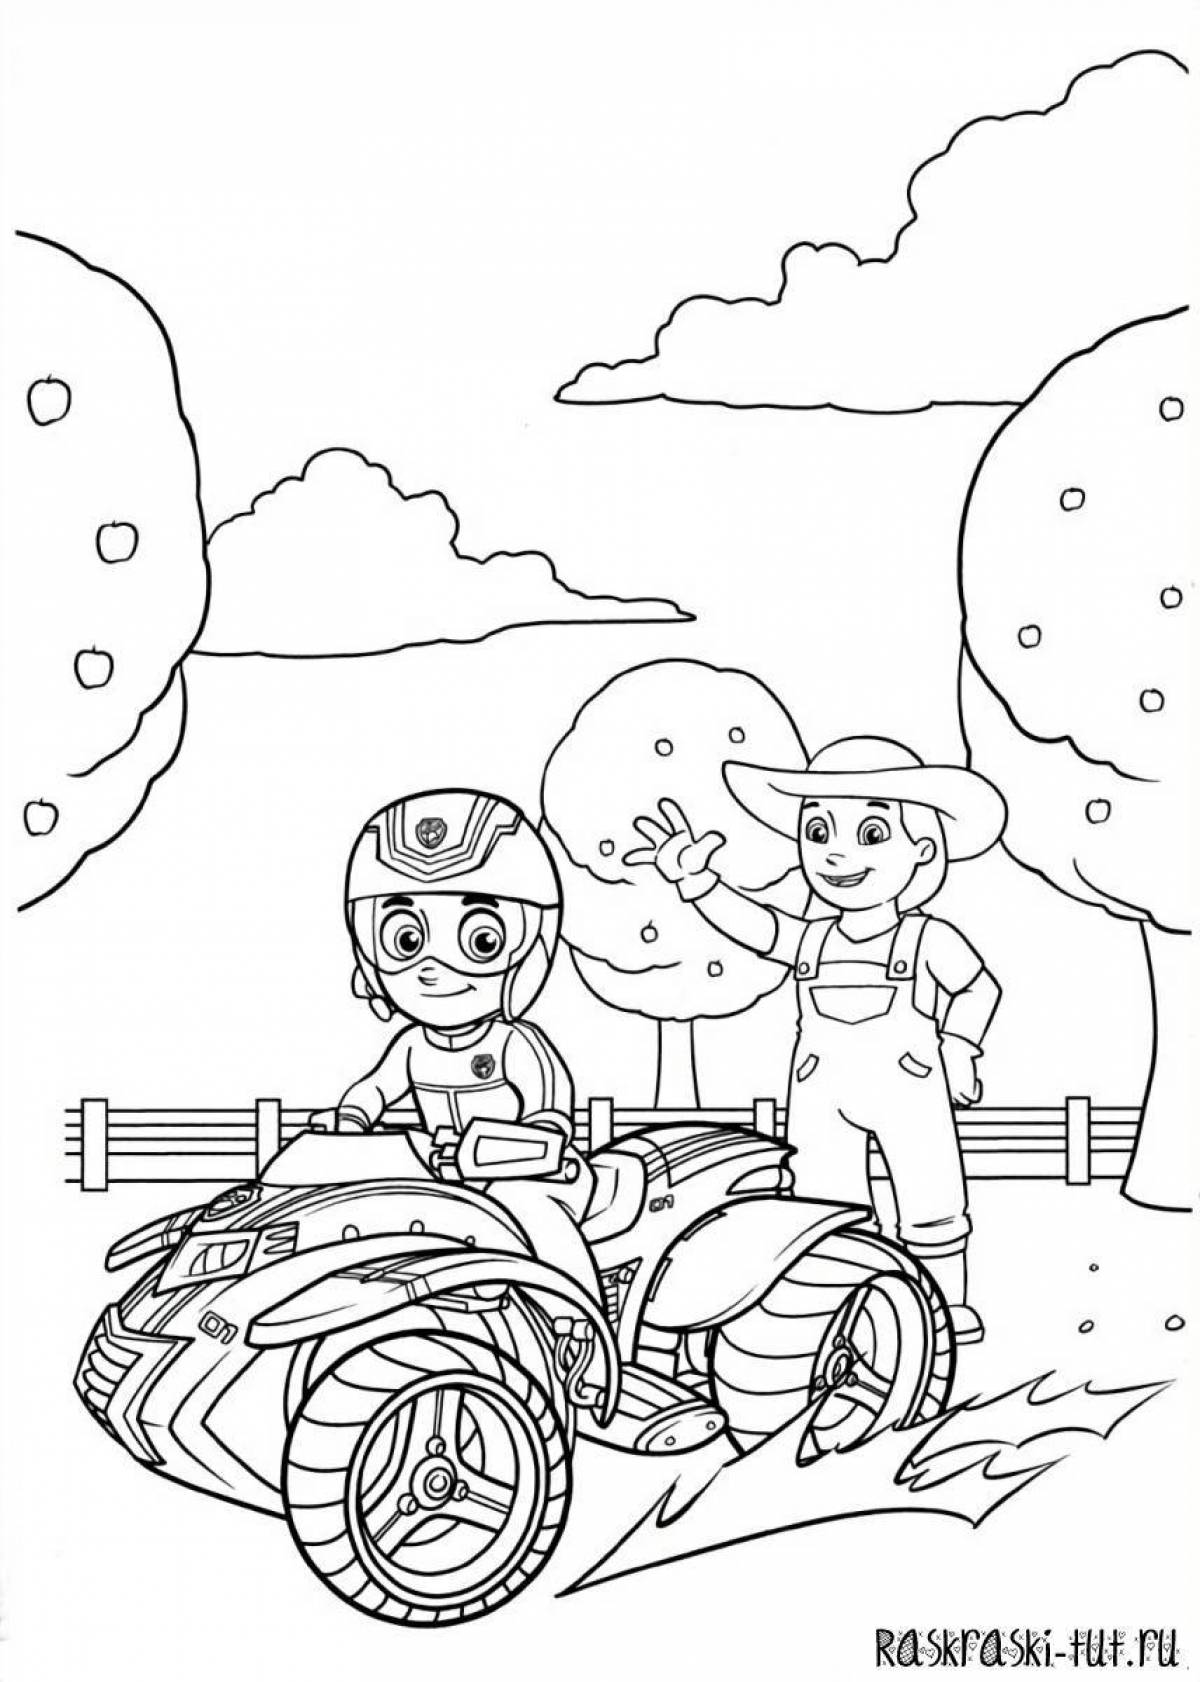 Dynamic Rider Coloring Page